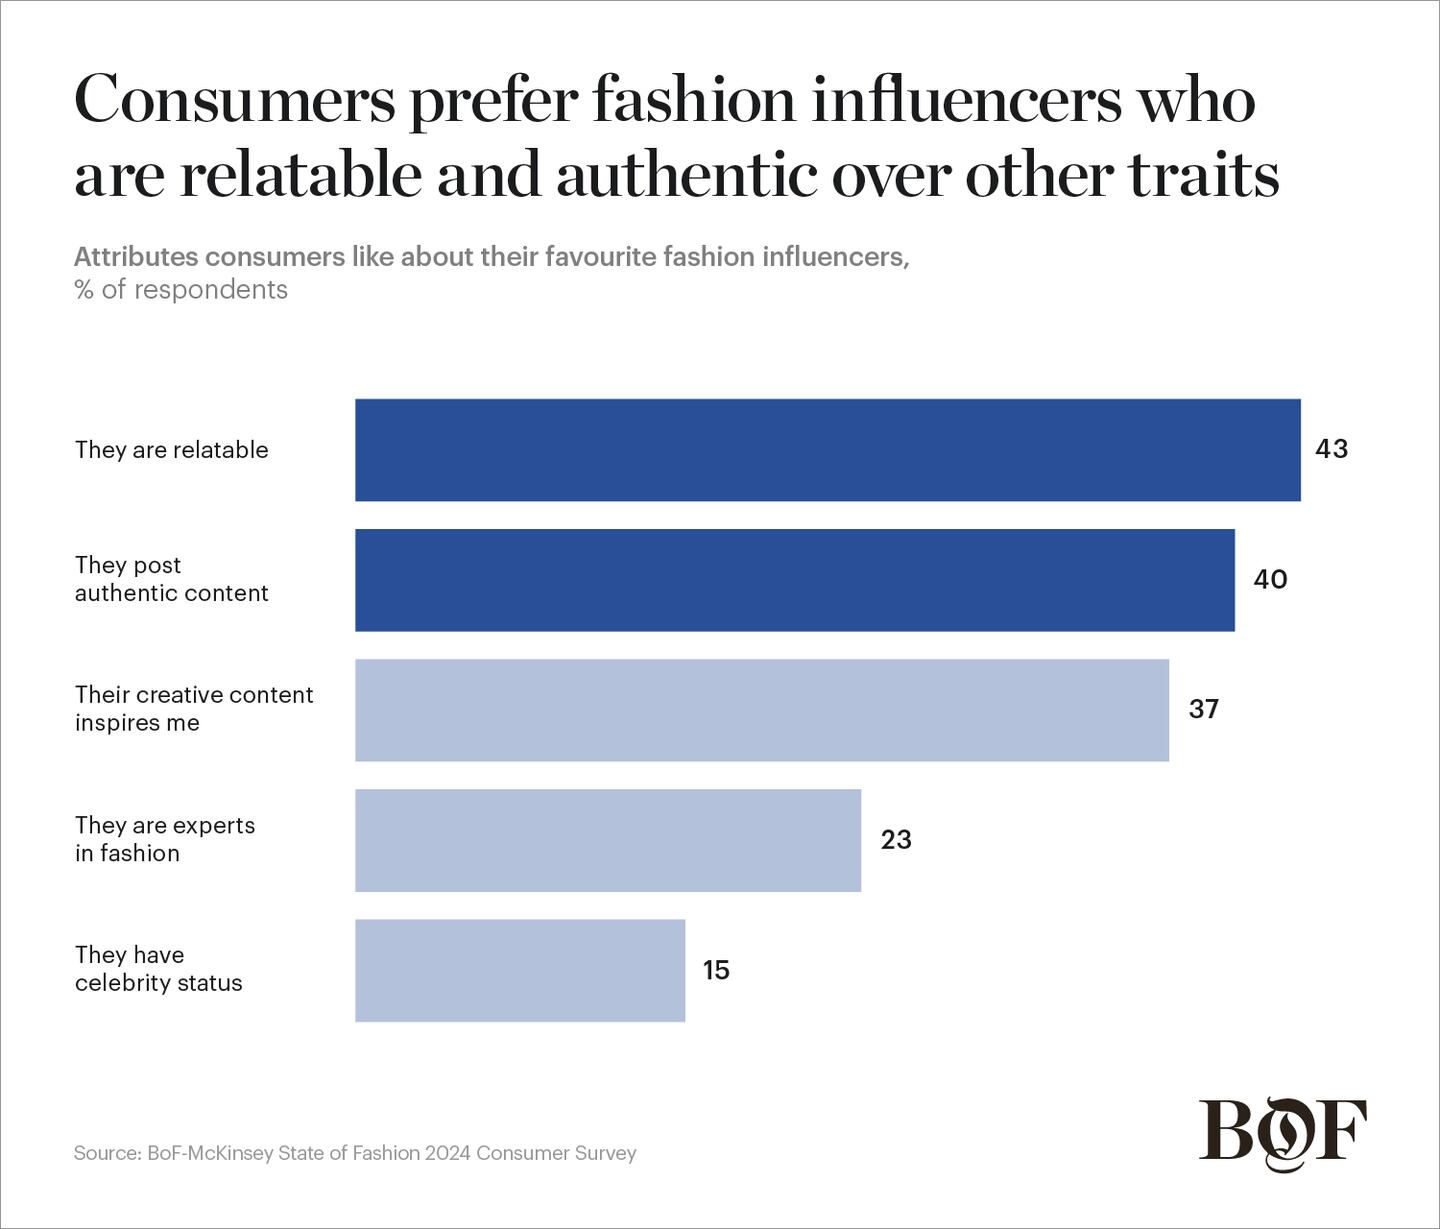 Consumers prefer fashion influencers who are relatable and authentic over other traits